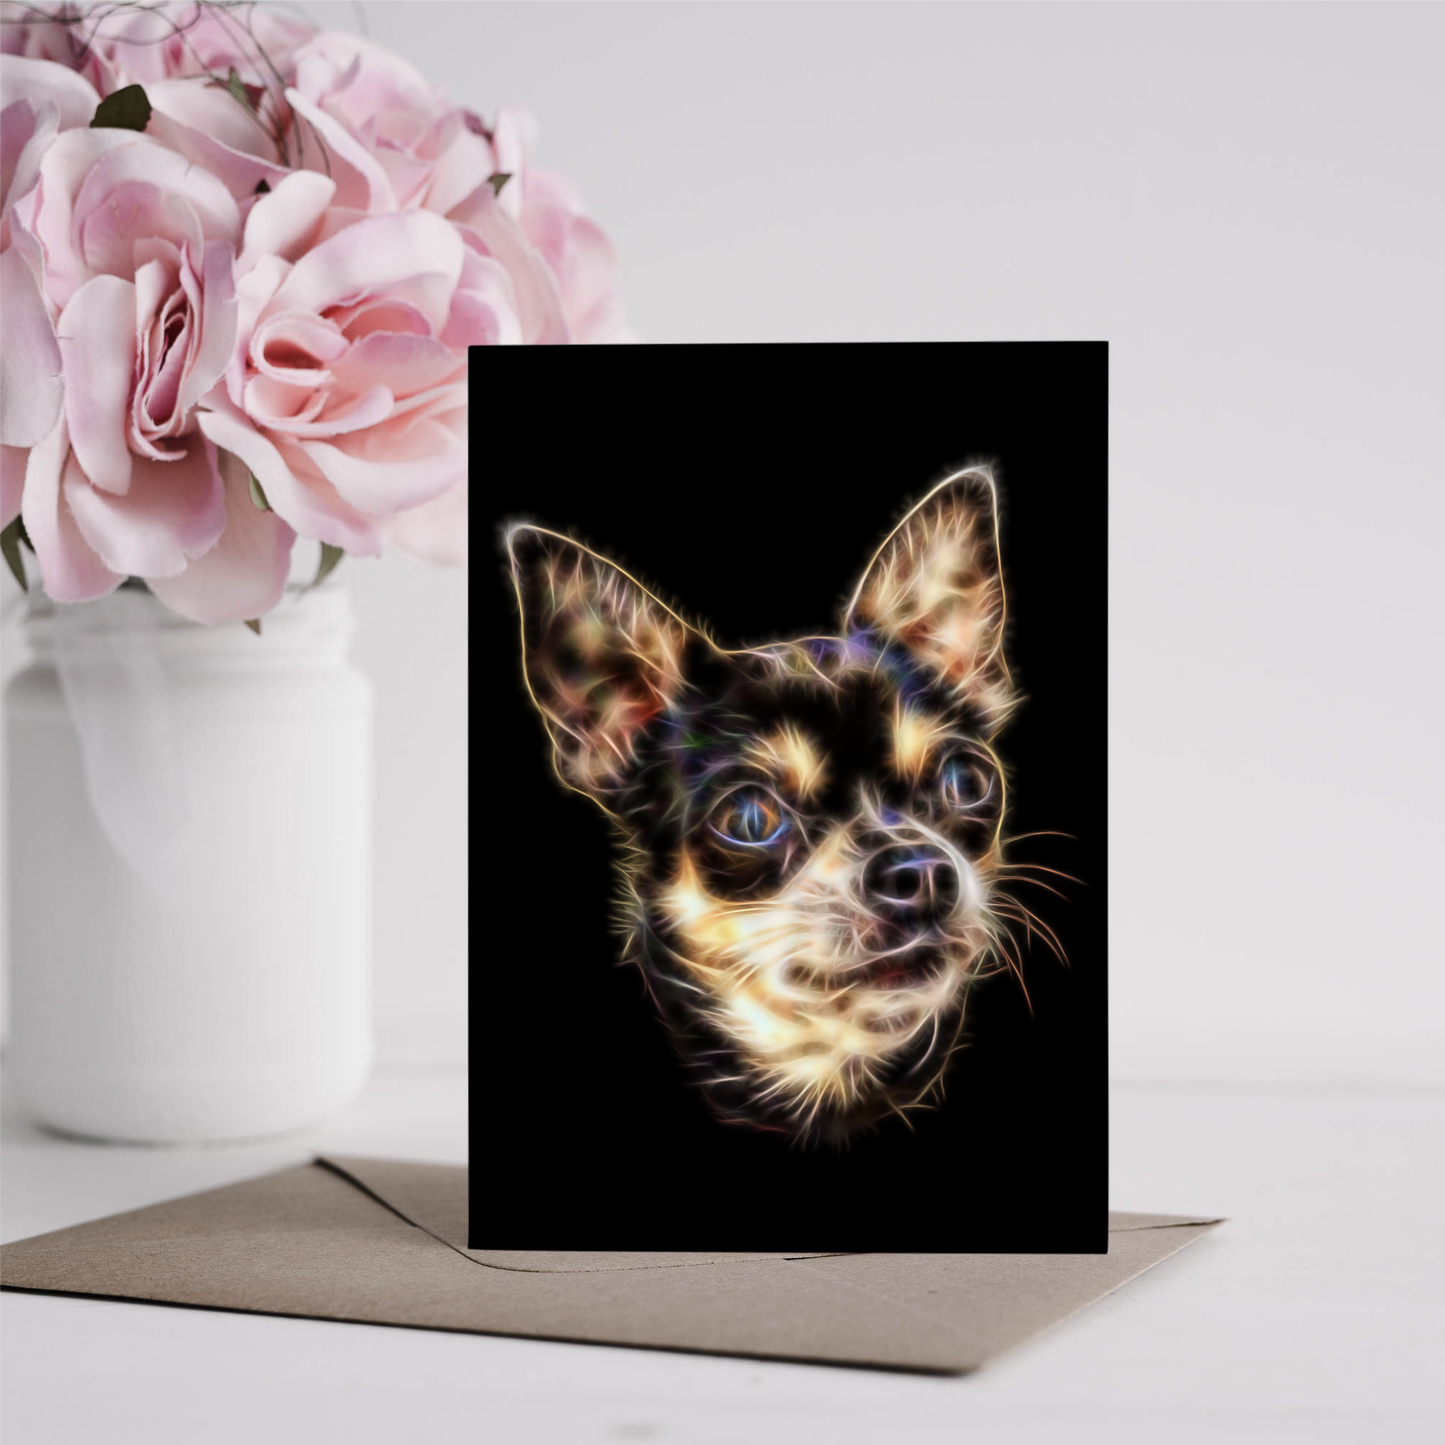 Short Haired Chihuahua Greeting Card Blank Inside for Birthdays or any other Occasion